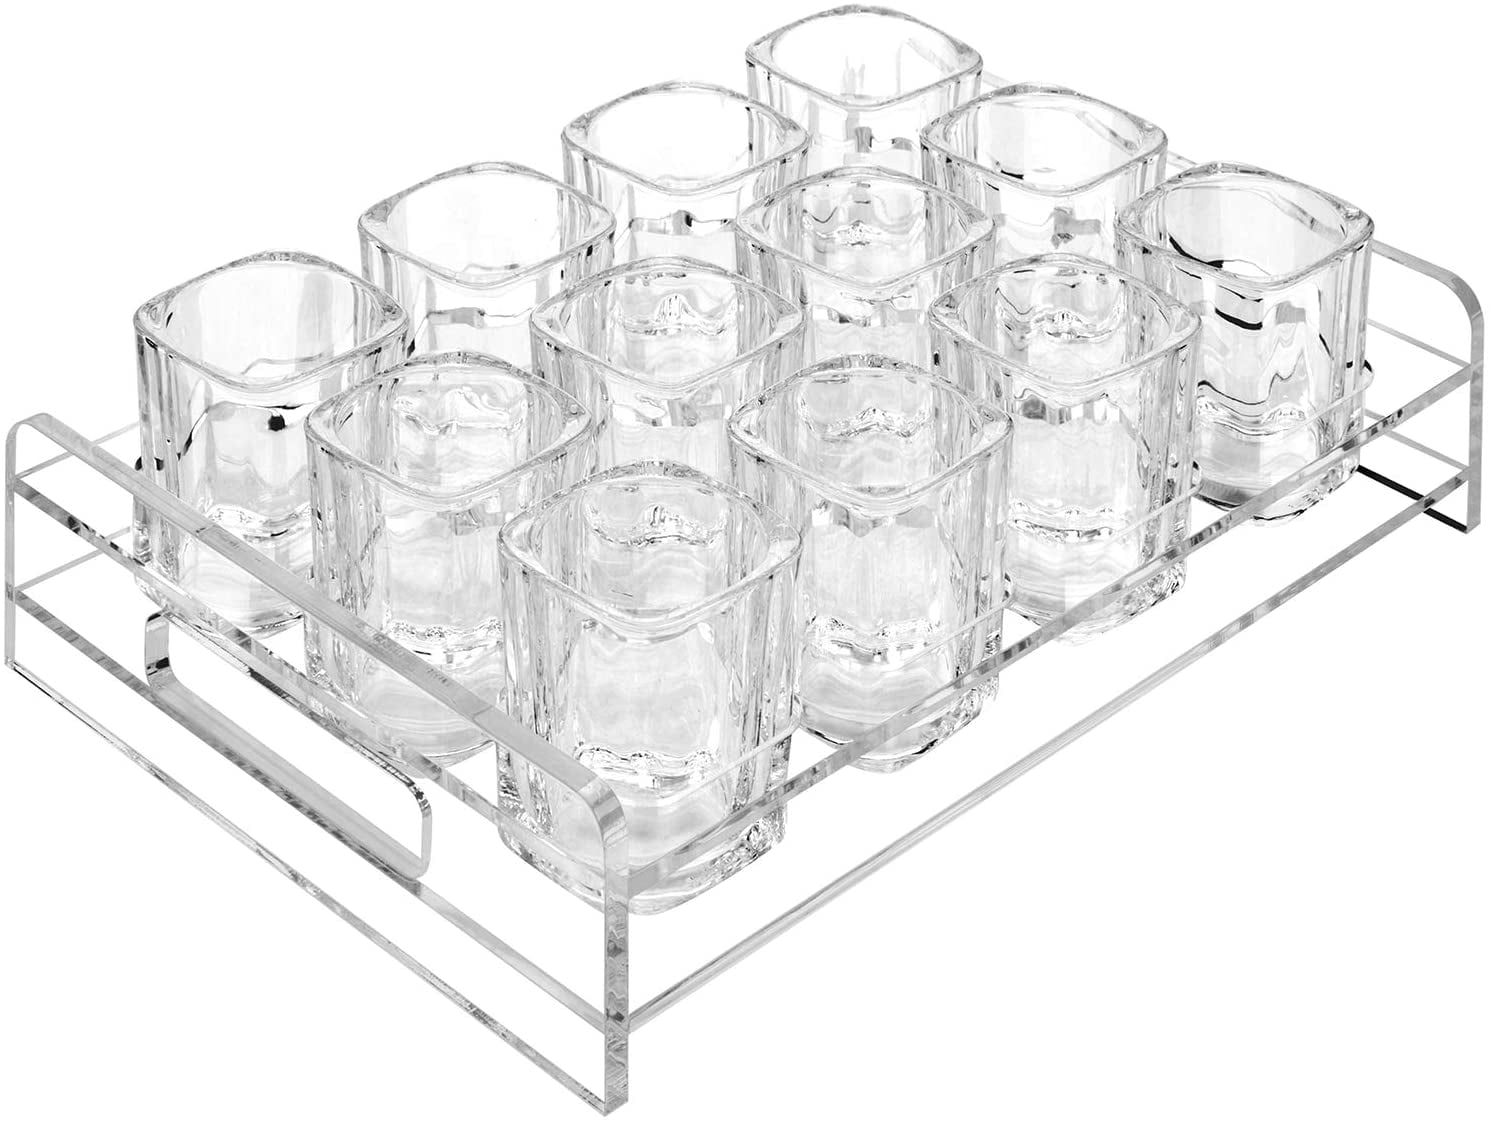 MyGift Clear Acrylic Party Liquor Serving Tray with 12 Shot Glasses and Handles